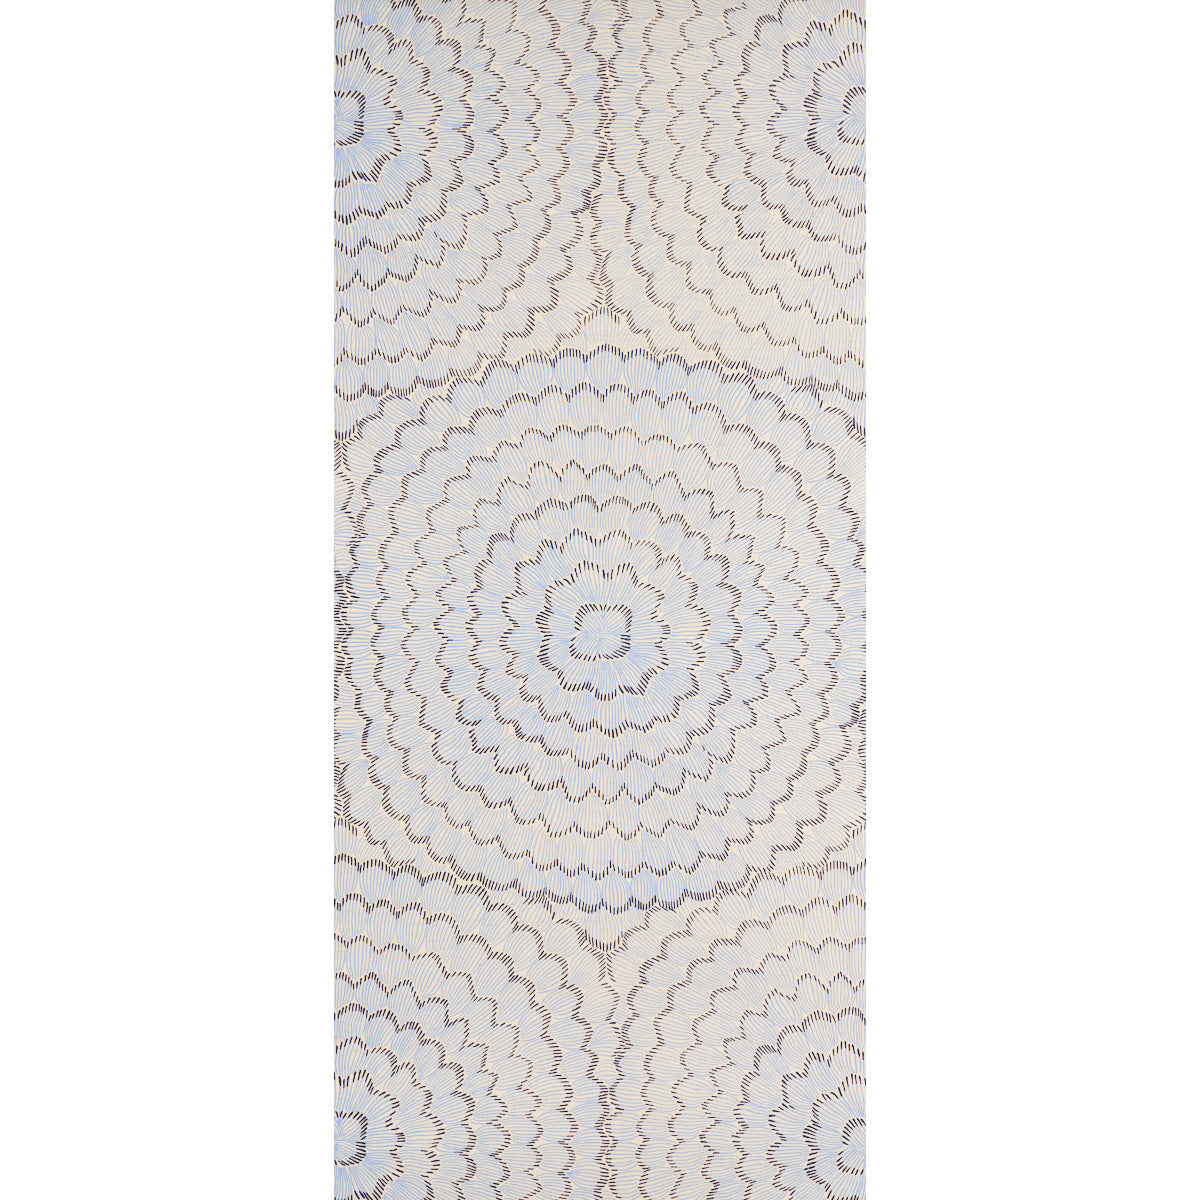 FEATHER BLOOM SISAL | TWO BLUES